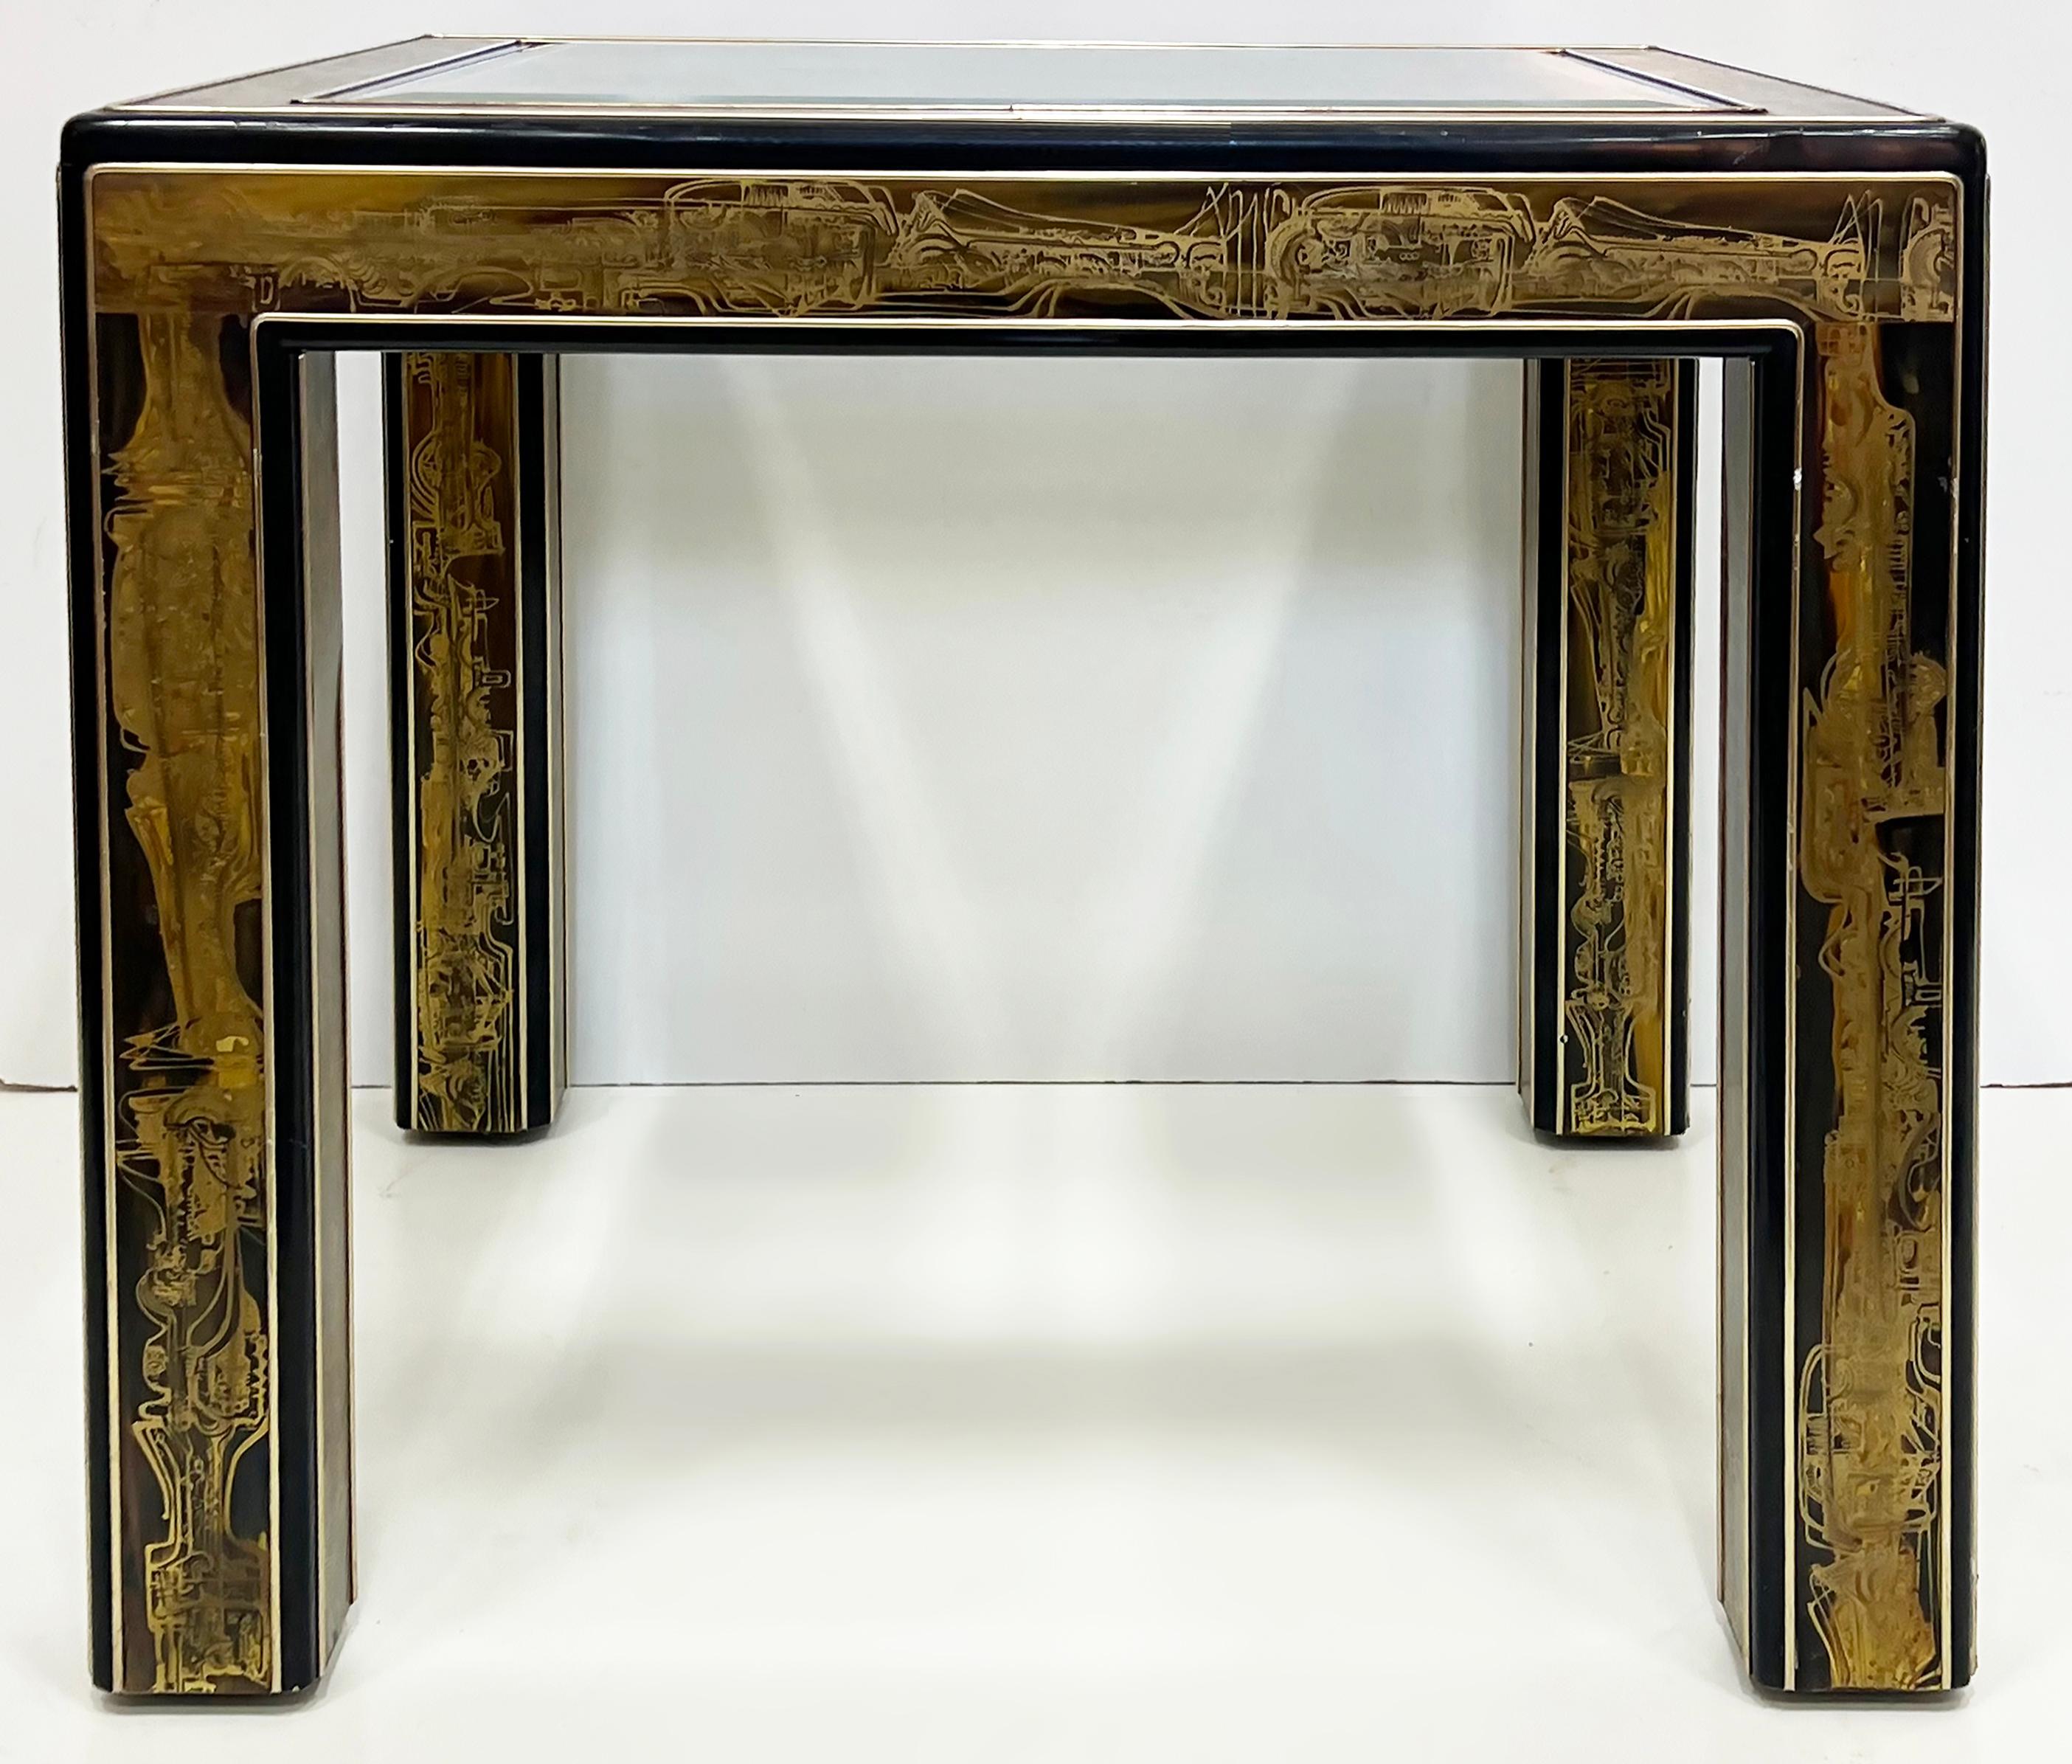  Mastercraft 1970s Bernhard Rohne Etched Brass Side Tables, Pair, Beveled Glass

Offered for sale is a pair of 1970s Mastercraft side tables by Bernhard Rohne.  Rohne is known for his acid-etched brass embellishment of Mastercraft furniture pieces. 